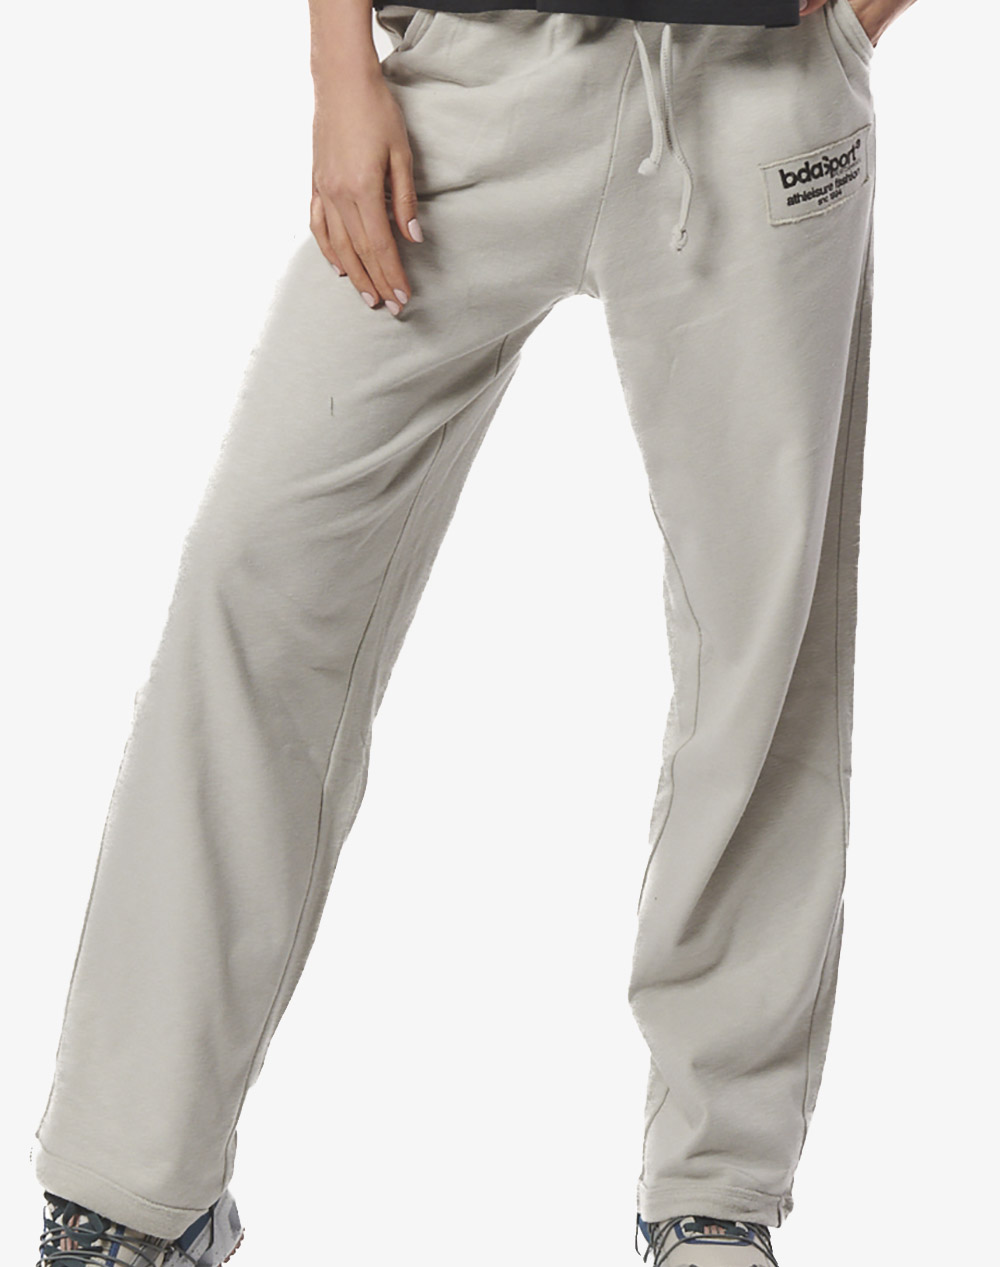 BODY ACTION WOMENS TERRY WIDE-LEG JAZZ PANTS